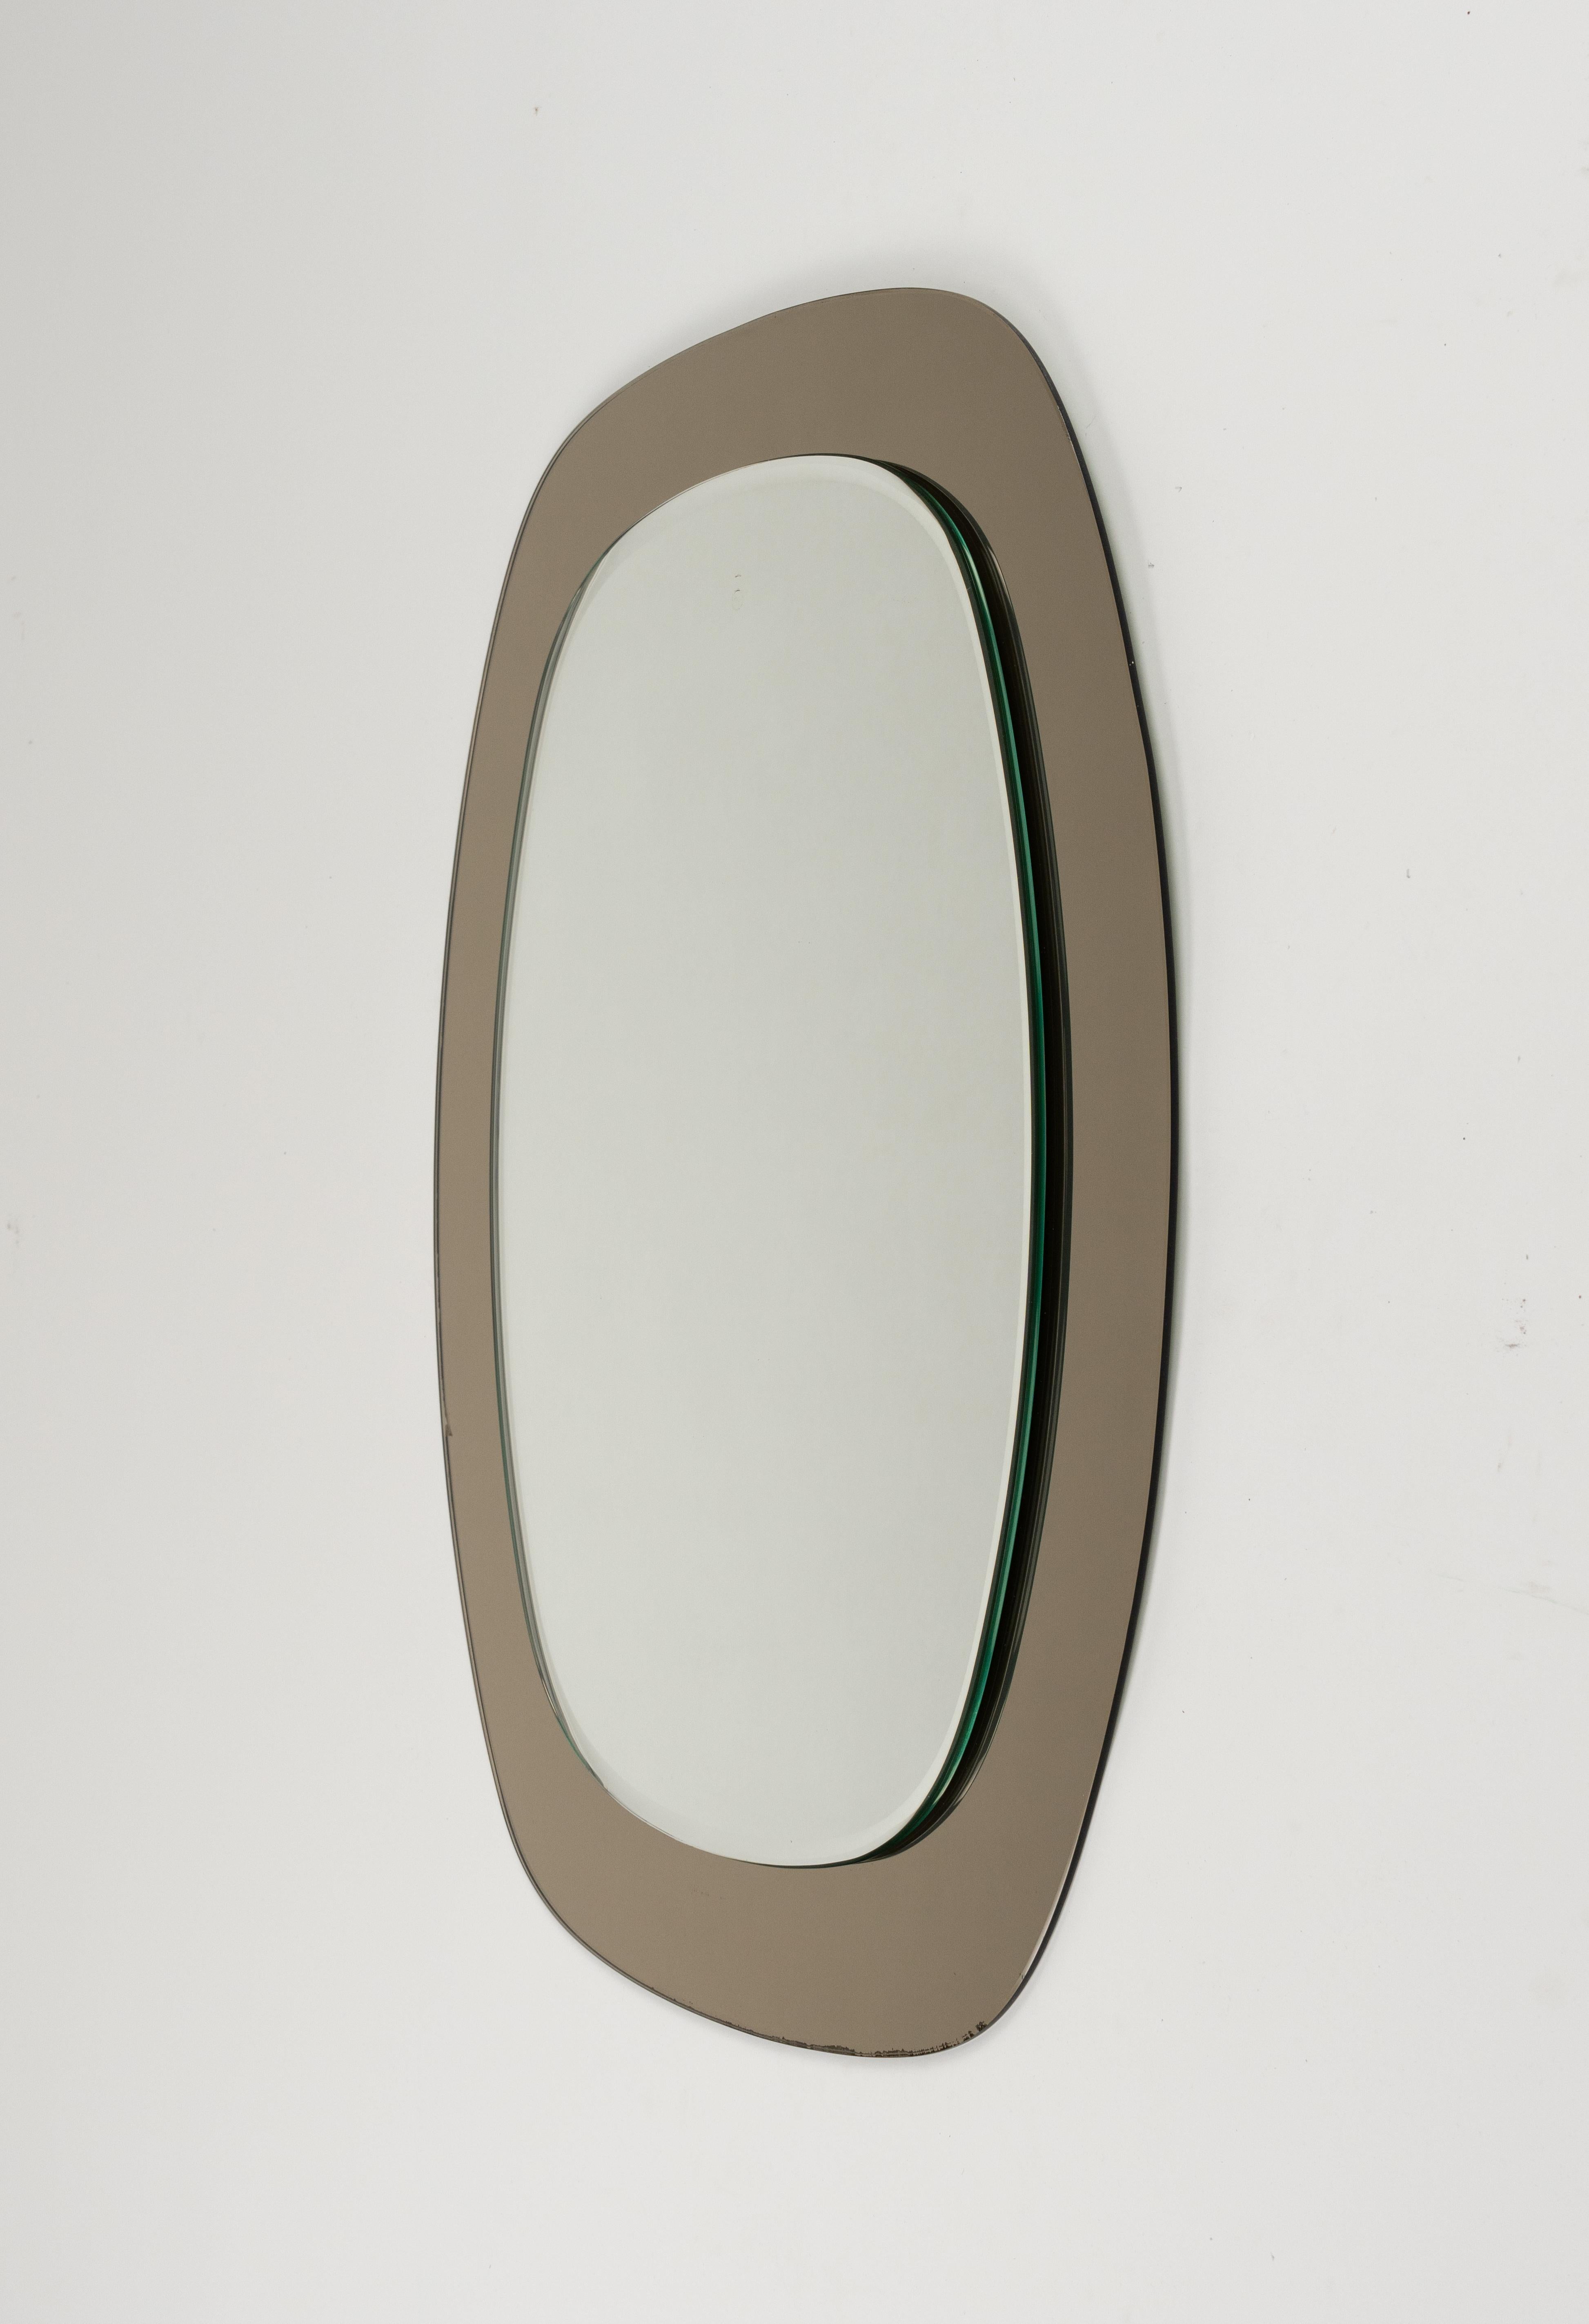 Metal Midcentury Cristal Art Oval Wall Mirror with Smoked Frame, Italy 1960s For Sale